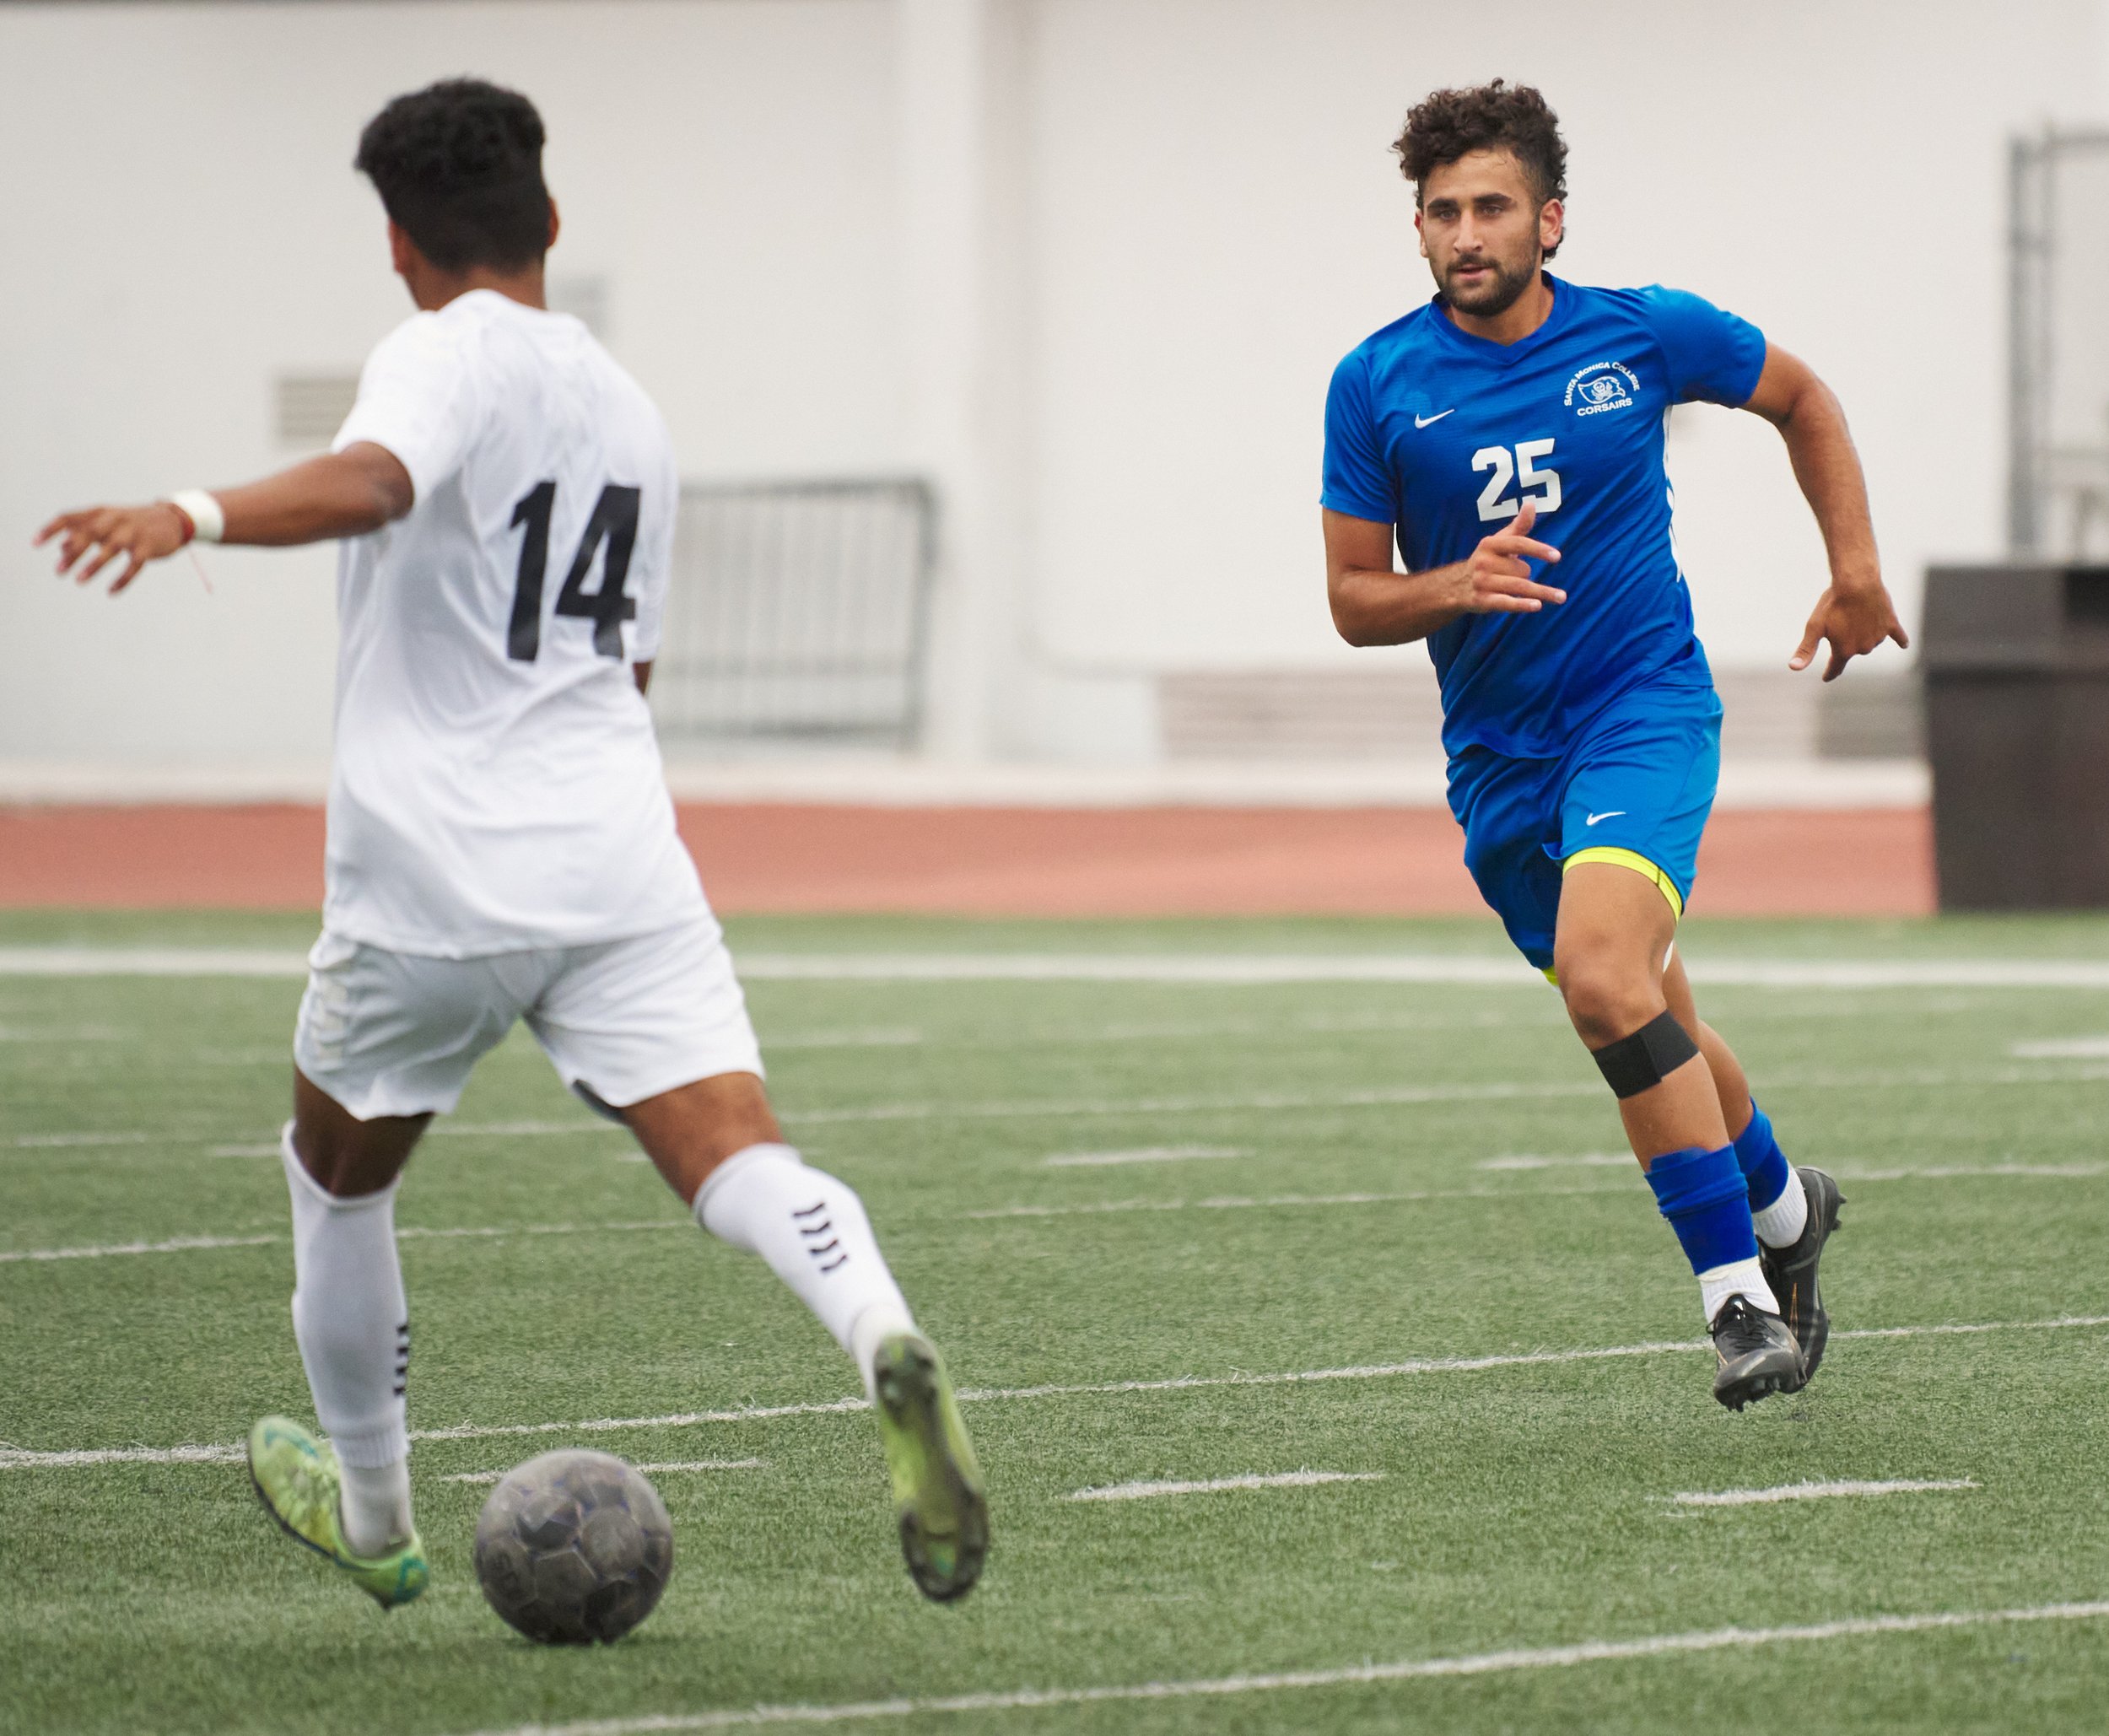  Adam Abou-Hamad (right), of the Santa Monica College Corsairs, and Edwin Gonzalez (left), of the Los Angeles Harbor College Seahawks, during the men's soccer match on Friday, September, 9, 2022, at Corsair Field in Santa Monica, Calif . The Corsairs